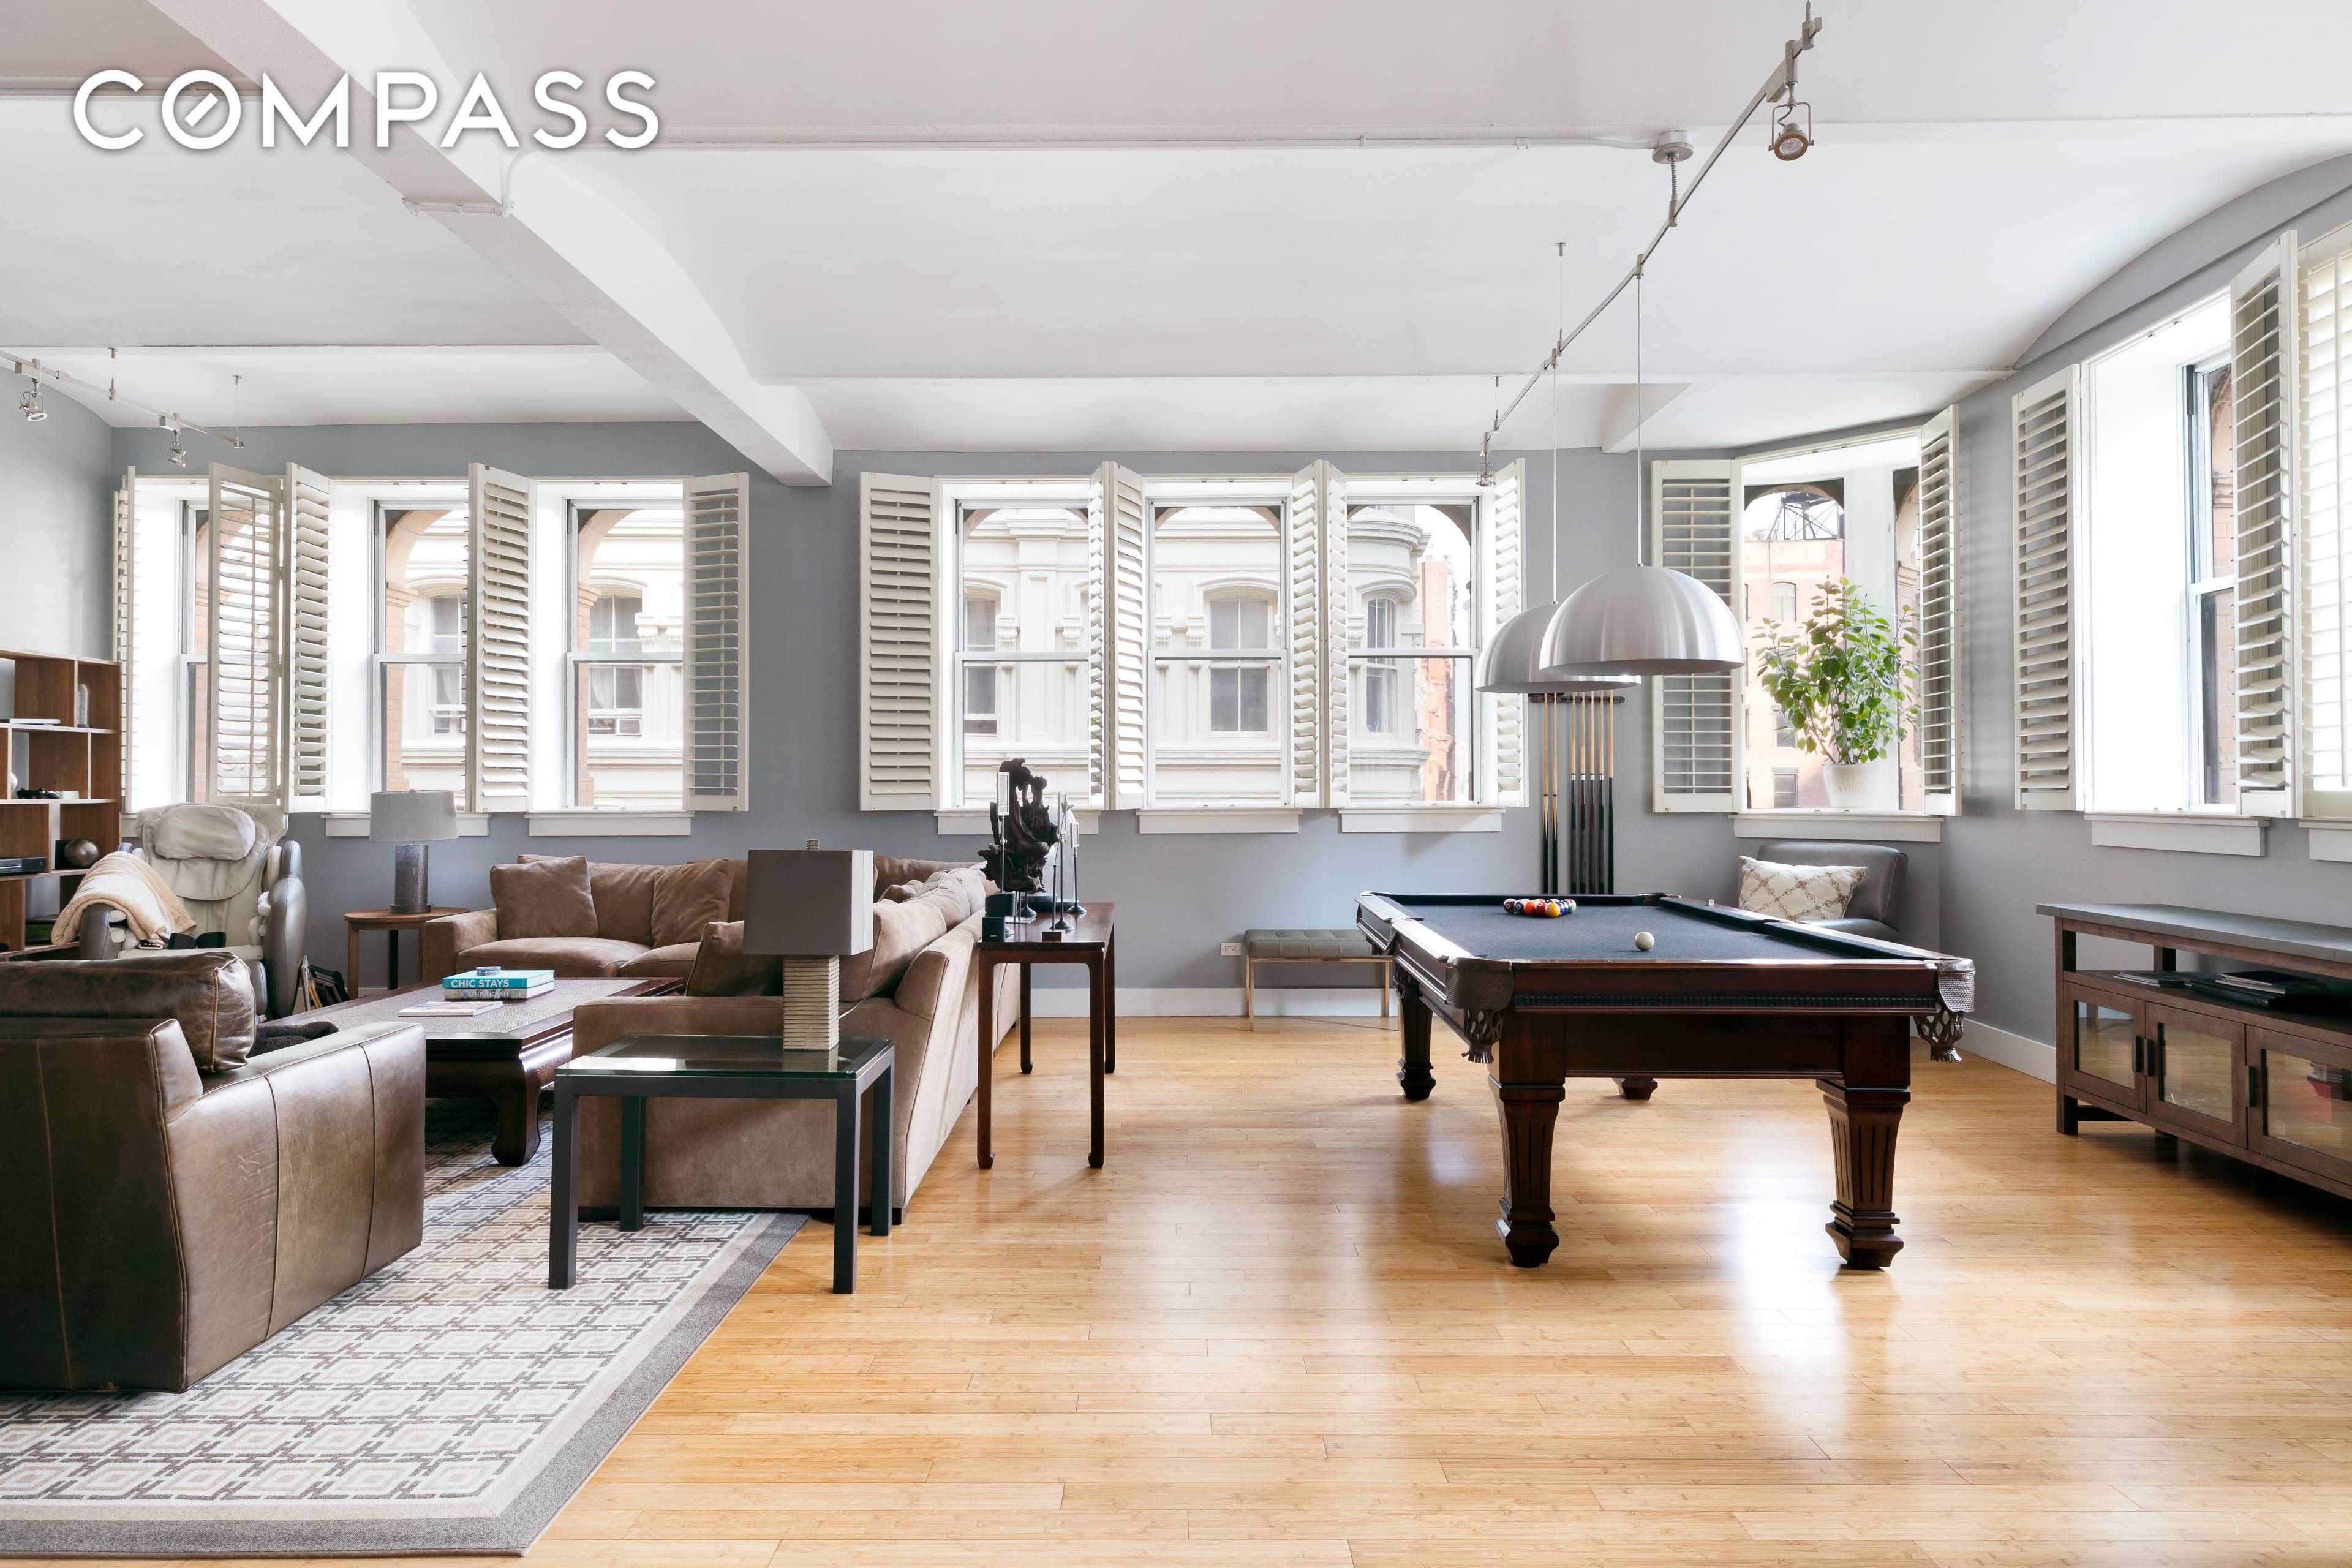 Featuring 23 windows and 12 foot barrel vaulted ceilings, apartment 9B is an immaculate half floor loft in a turn of the century landmarked condo conversion.